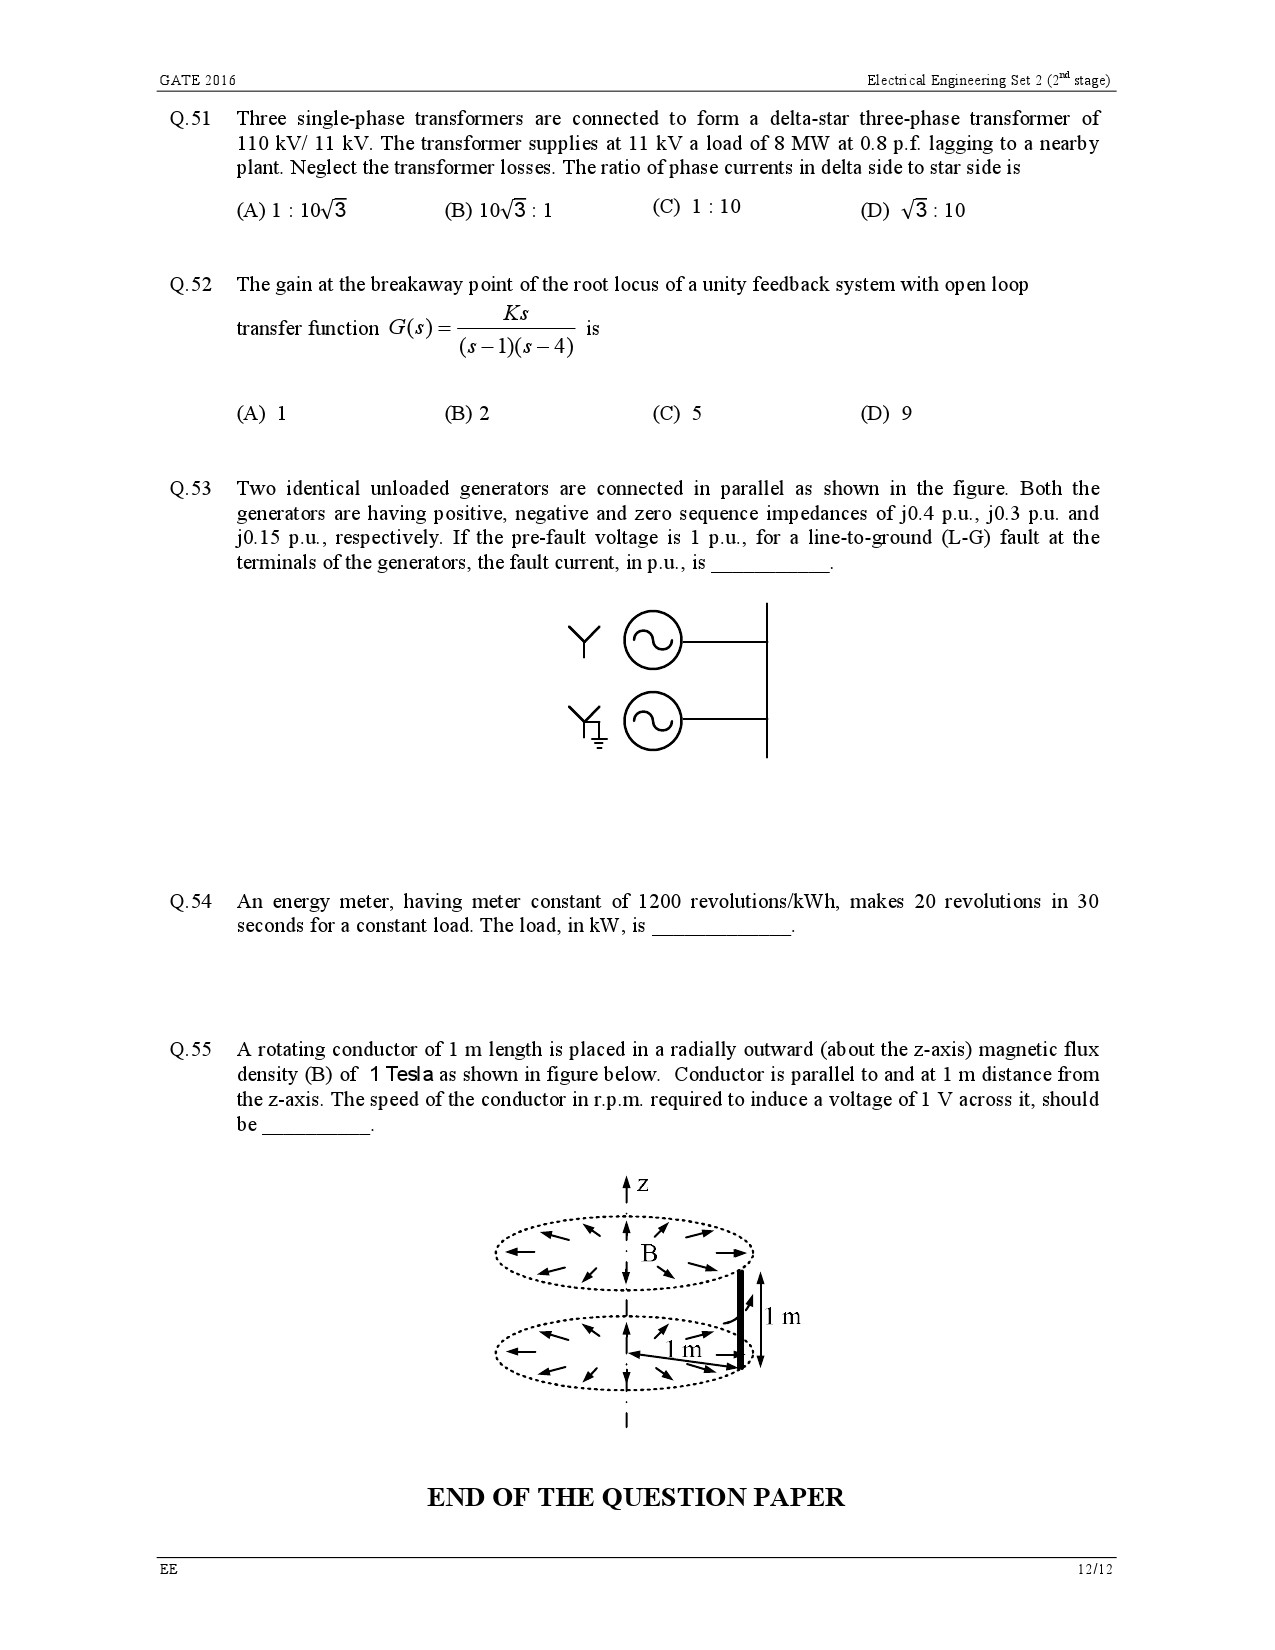 GATE Exam Question Paper 2016 Electrical Engineering Set 2 15